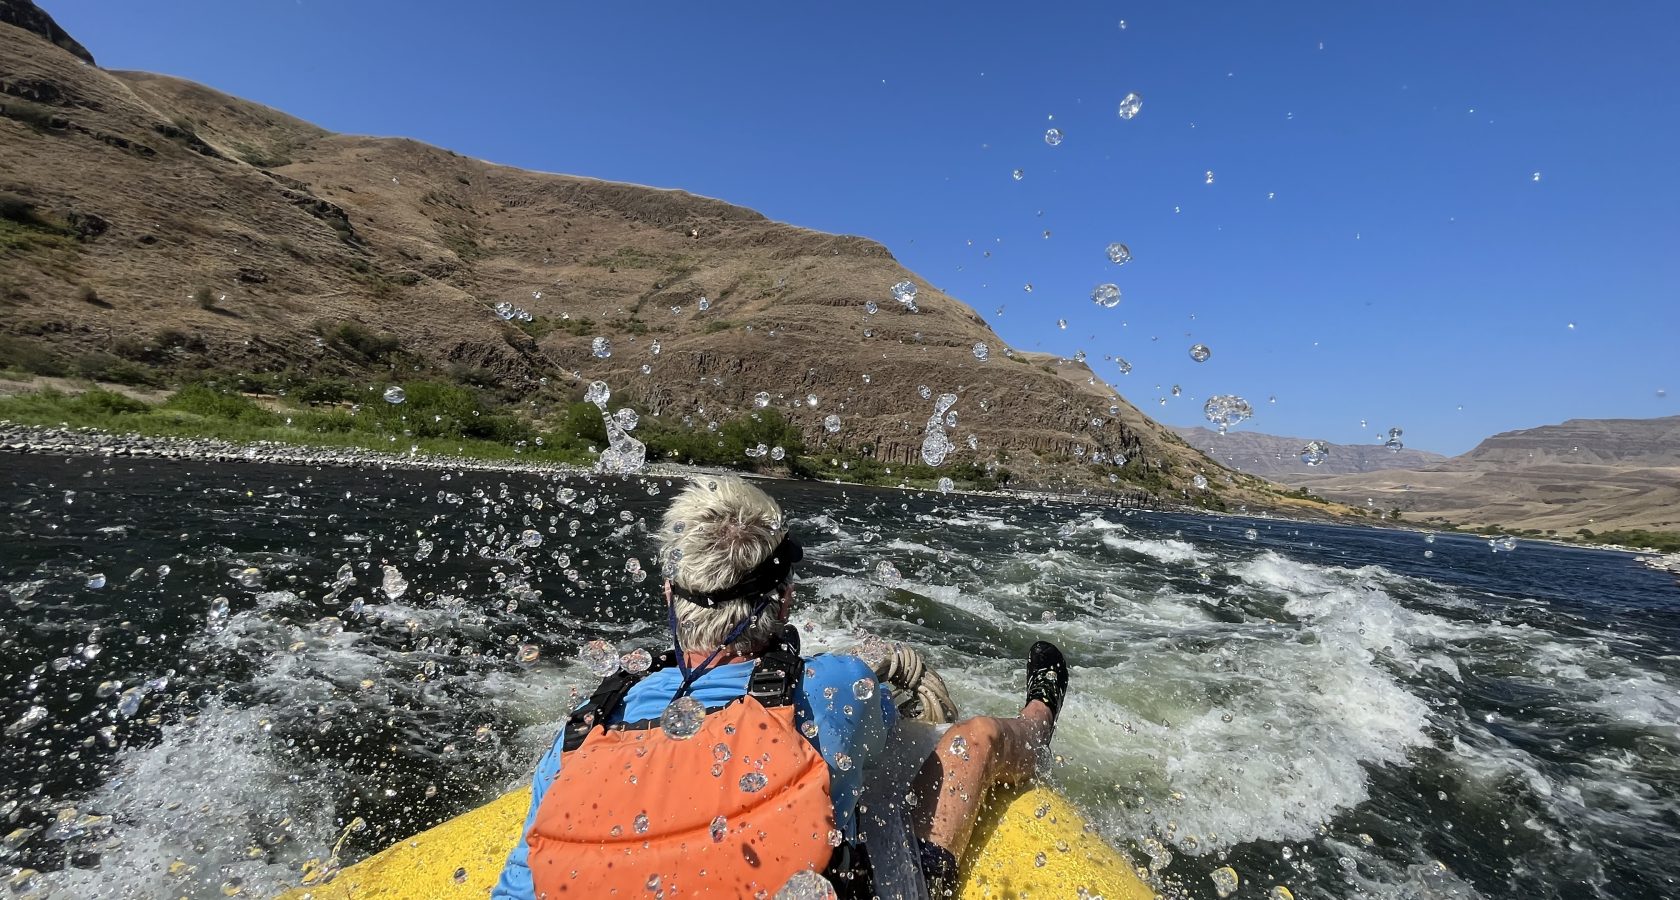 A guest on an OARS rafting trip rides through a rapid on the Snake River